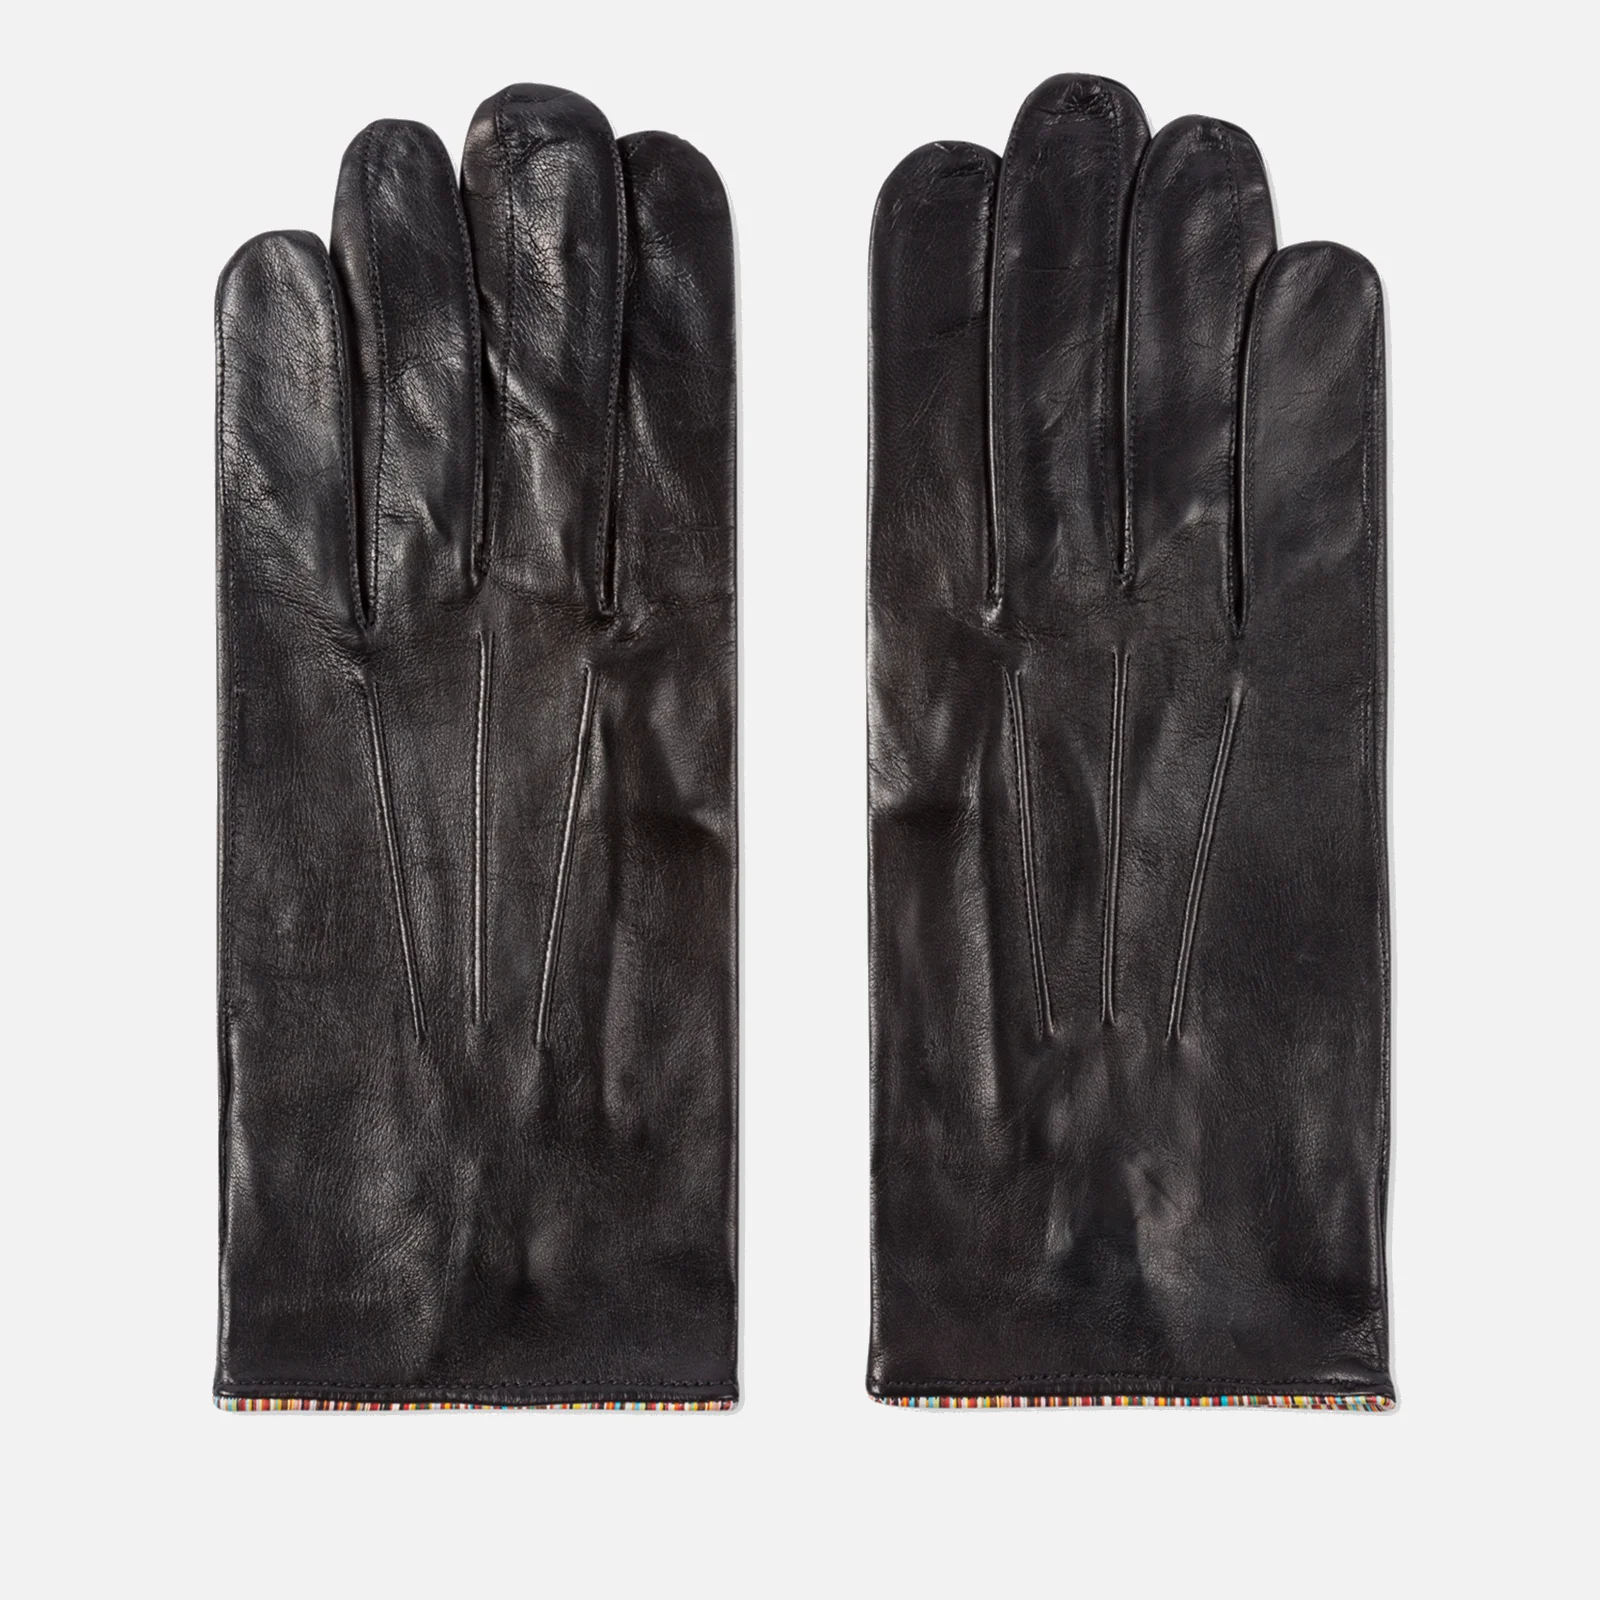 Paul Smith Leather Gloves - M Image 1